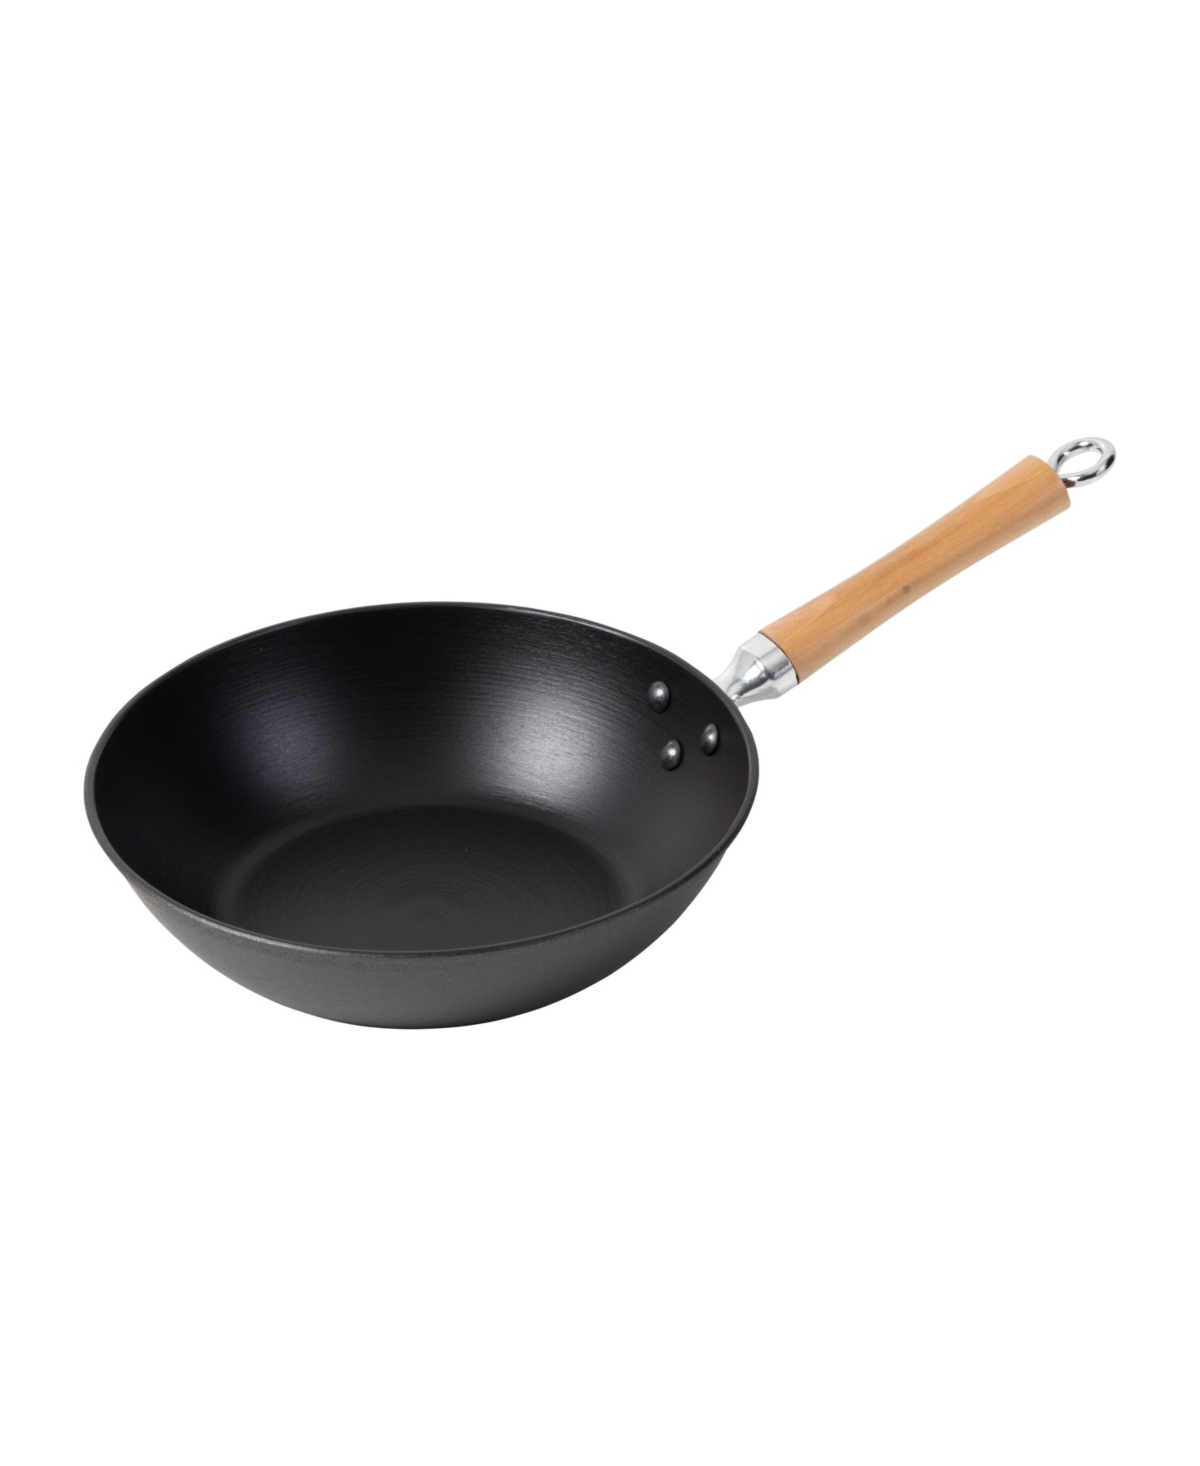 Joyce Chen Professional Series Cast Iron Stir Fry Pan With Maple Handle, 11.5" In Black